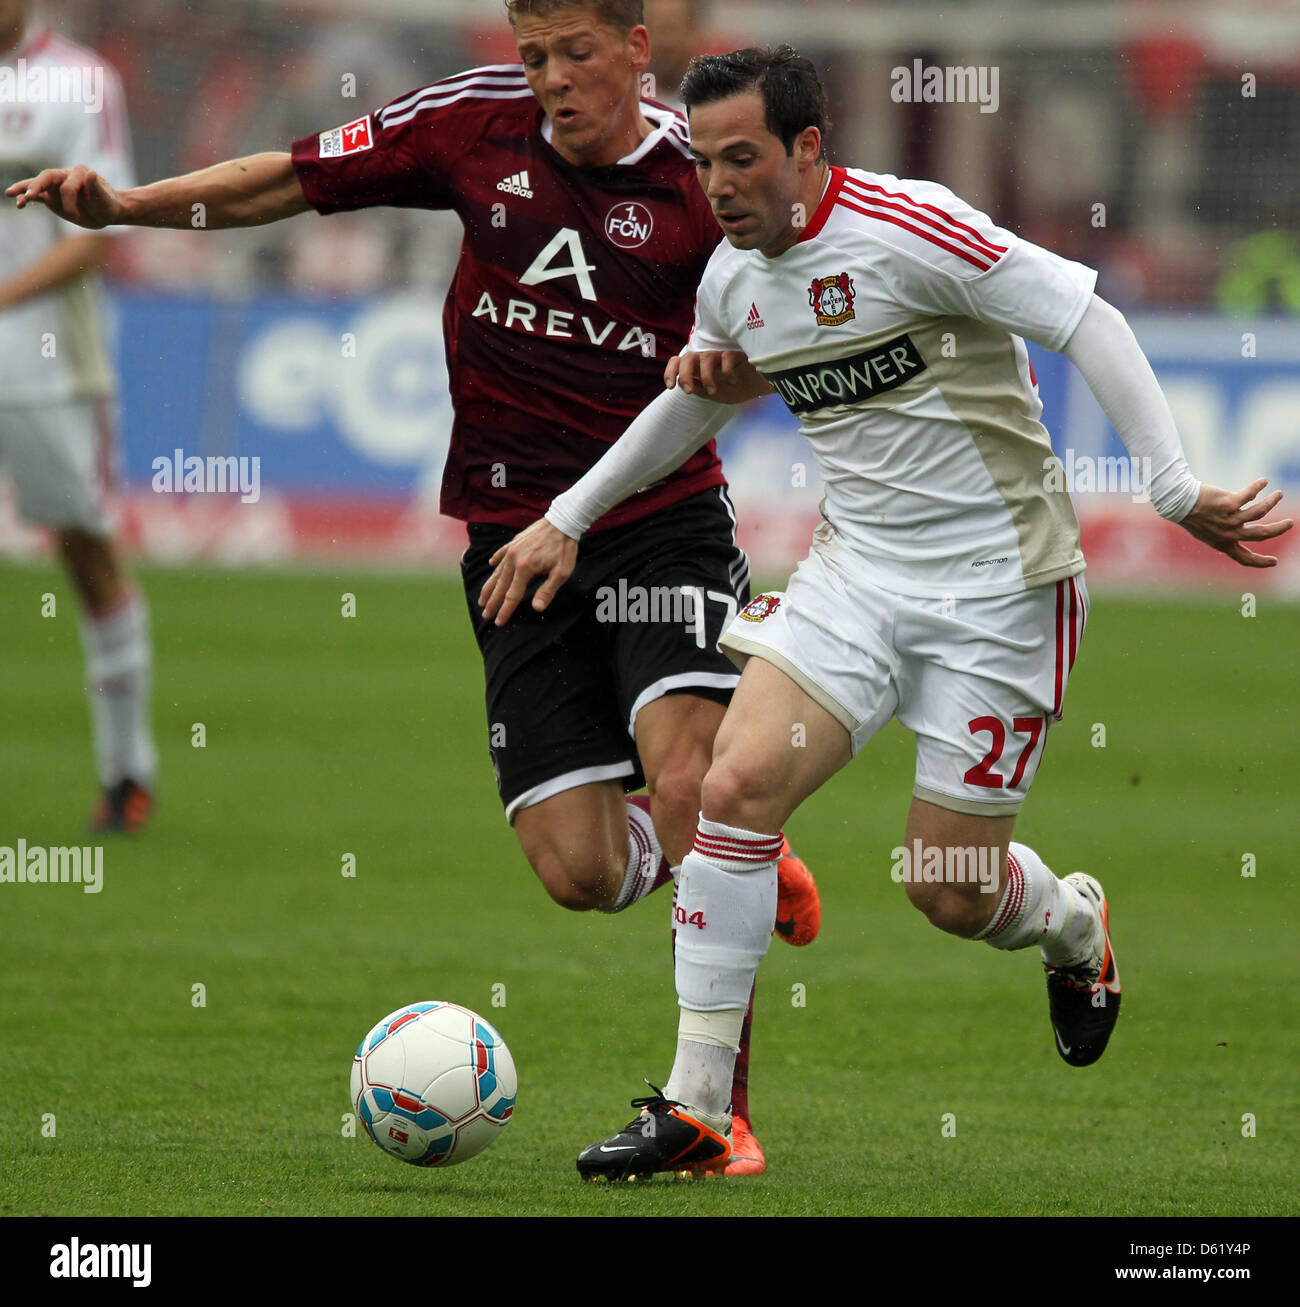 Leverkusen's Gonzalo Castro (R) vies for the ball with Nuremberg's Maik Frantz during the Bundesliga soccer match between 1. FC Nuremberg and Bayer 04 Leverkusen at easyCredit Stadion in Nuremberg, Germany, 05 May 2012. Photo: DANIEL KARMANN  (ATTENTION: EMBARGO CONDITIONS! The DFL permits the further utilisation of the pictures in IPTV, mobile services and other new technologies o Stock Photo